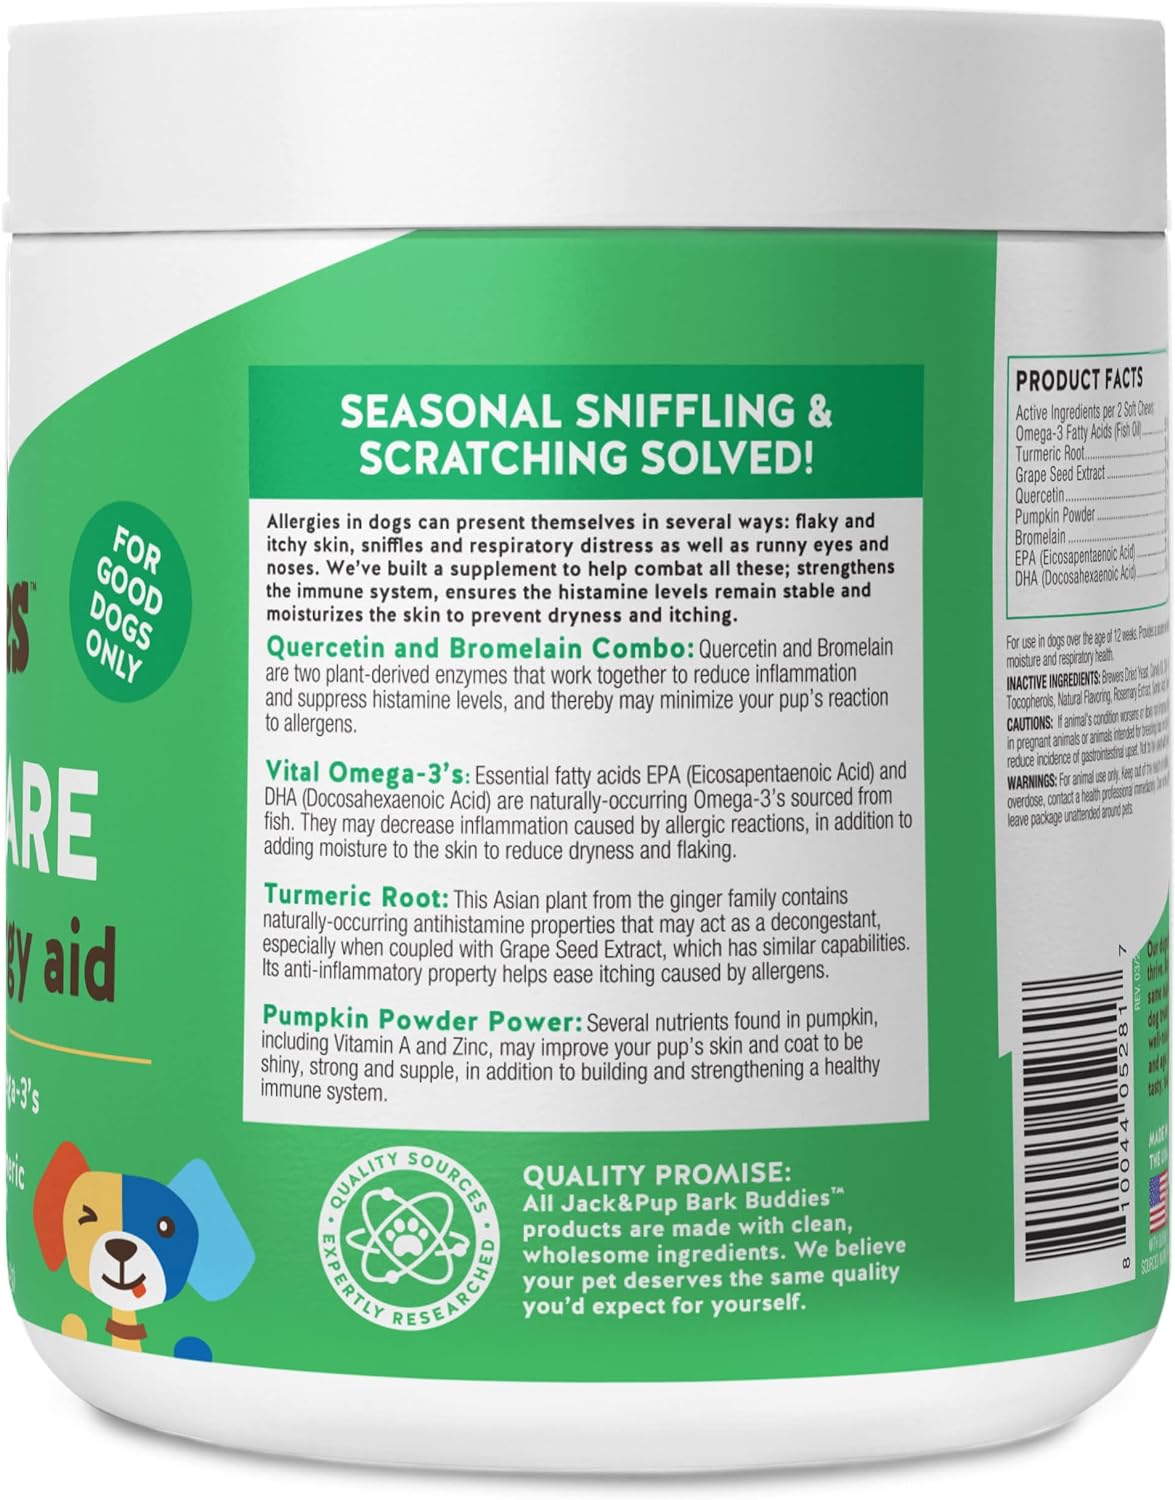 Jack&Pup Dog Allergy Chews - Bark Buddies Aller-Care Soft Chew Bites Itch Relief for Dogs & Allergy Support for Dogs - Dog Immune Supplement, Dog Skin Allergies Treatment and Anti Itch for Dogs 120ct : Pet Supplies